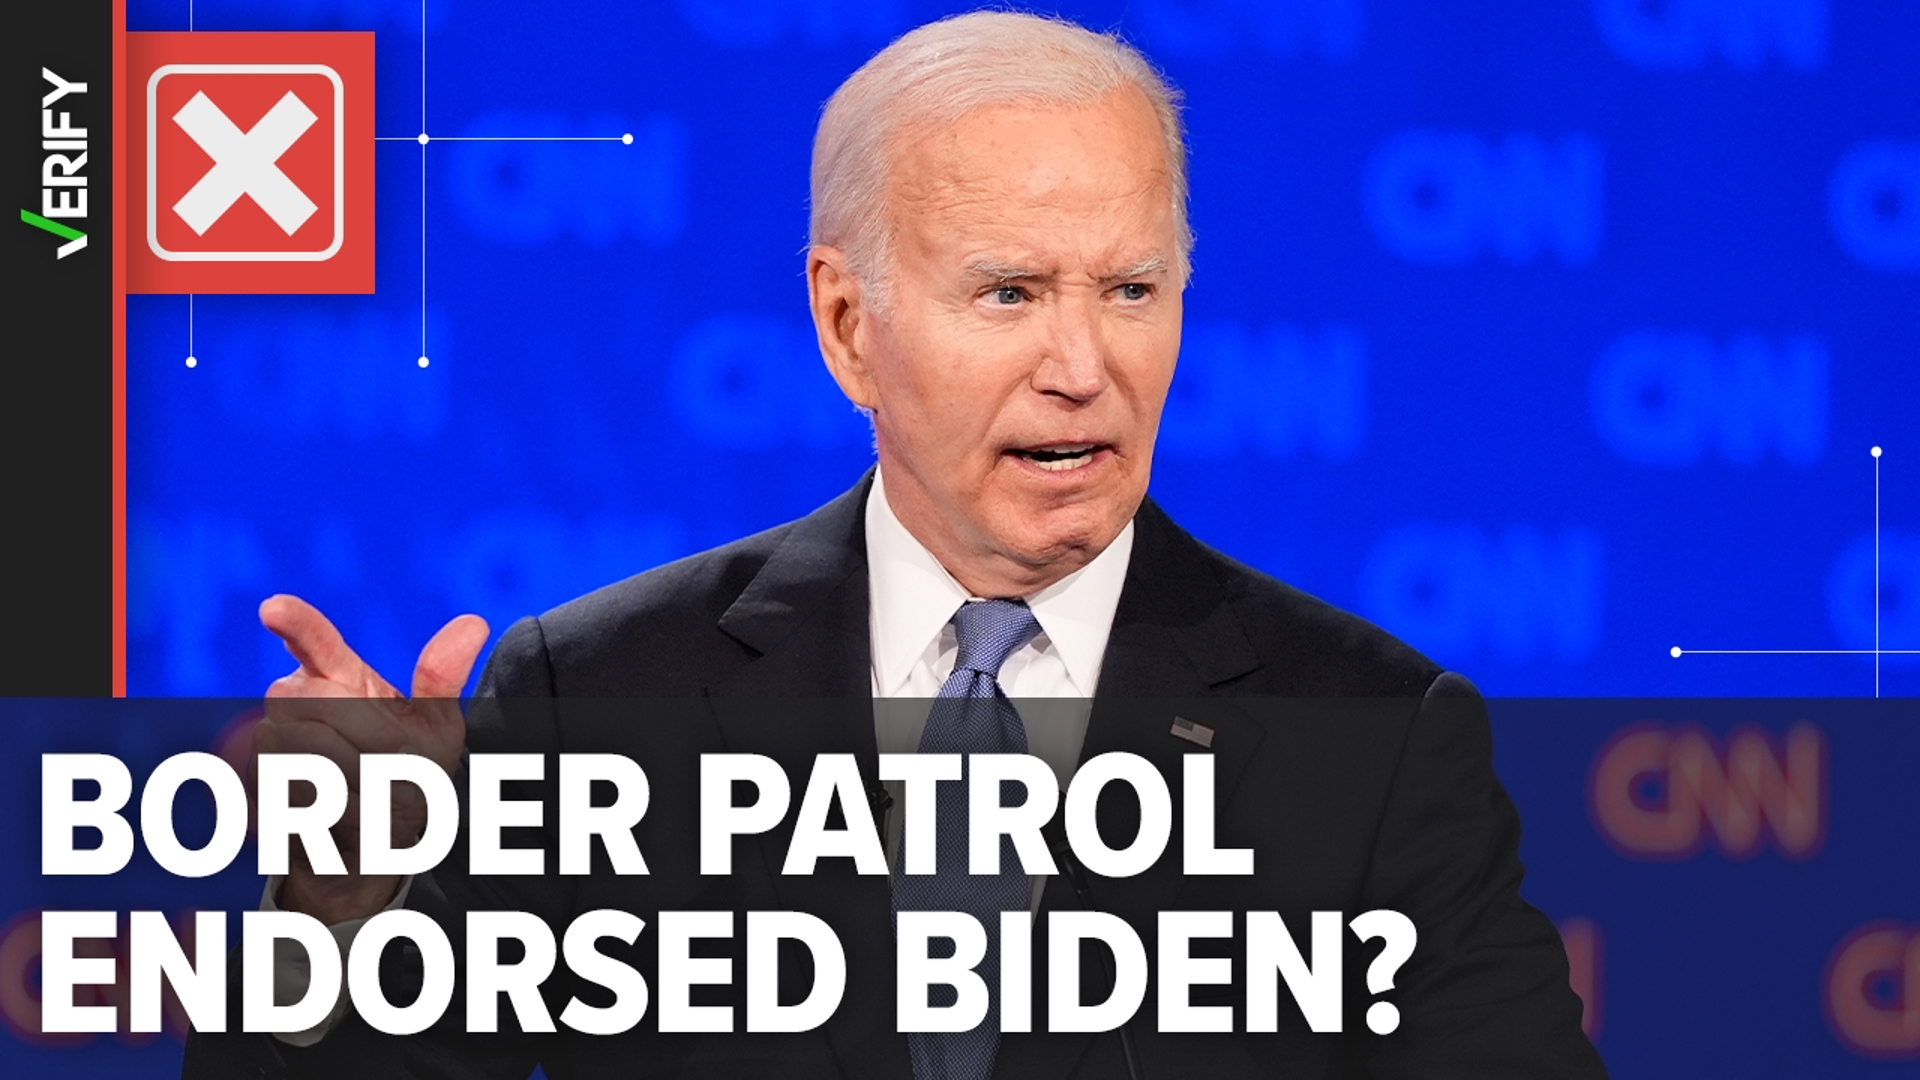 The Border Patrol Union hasn’t endorsed Biden and said it “never will.” It previously endorsed a border security bill backed by the Biden administration.